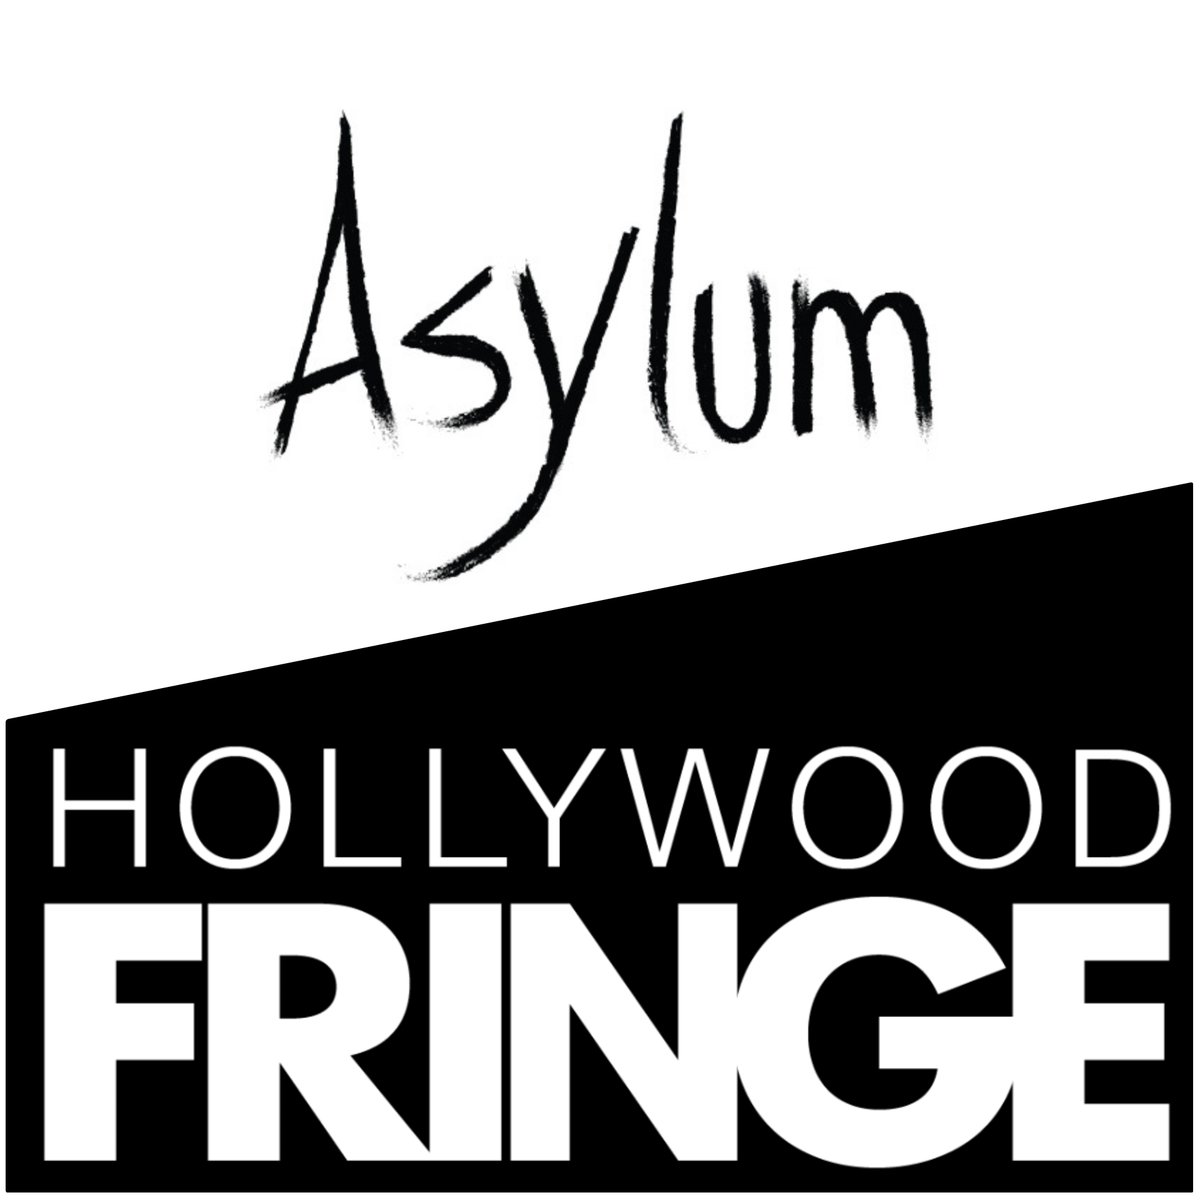 TICKETS ARE ON SALE for the 2024 Hollywood Fringe Fringe Festival - June 6-30. @theaterasylum  is happy to be back for this the 14th year of @hollywoodfringe.
With over 60 shows in the Asylum Family #HFF24 #LATHTR @worldfringe #worldfringe #usaff #hollywood #fringe #festival